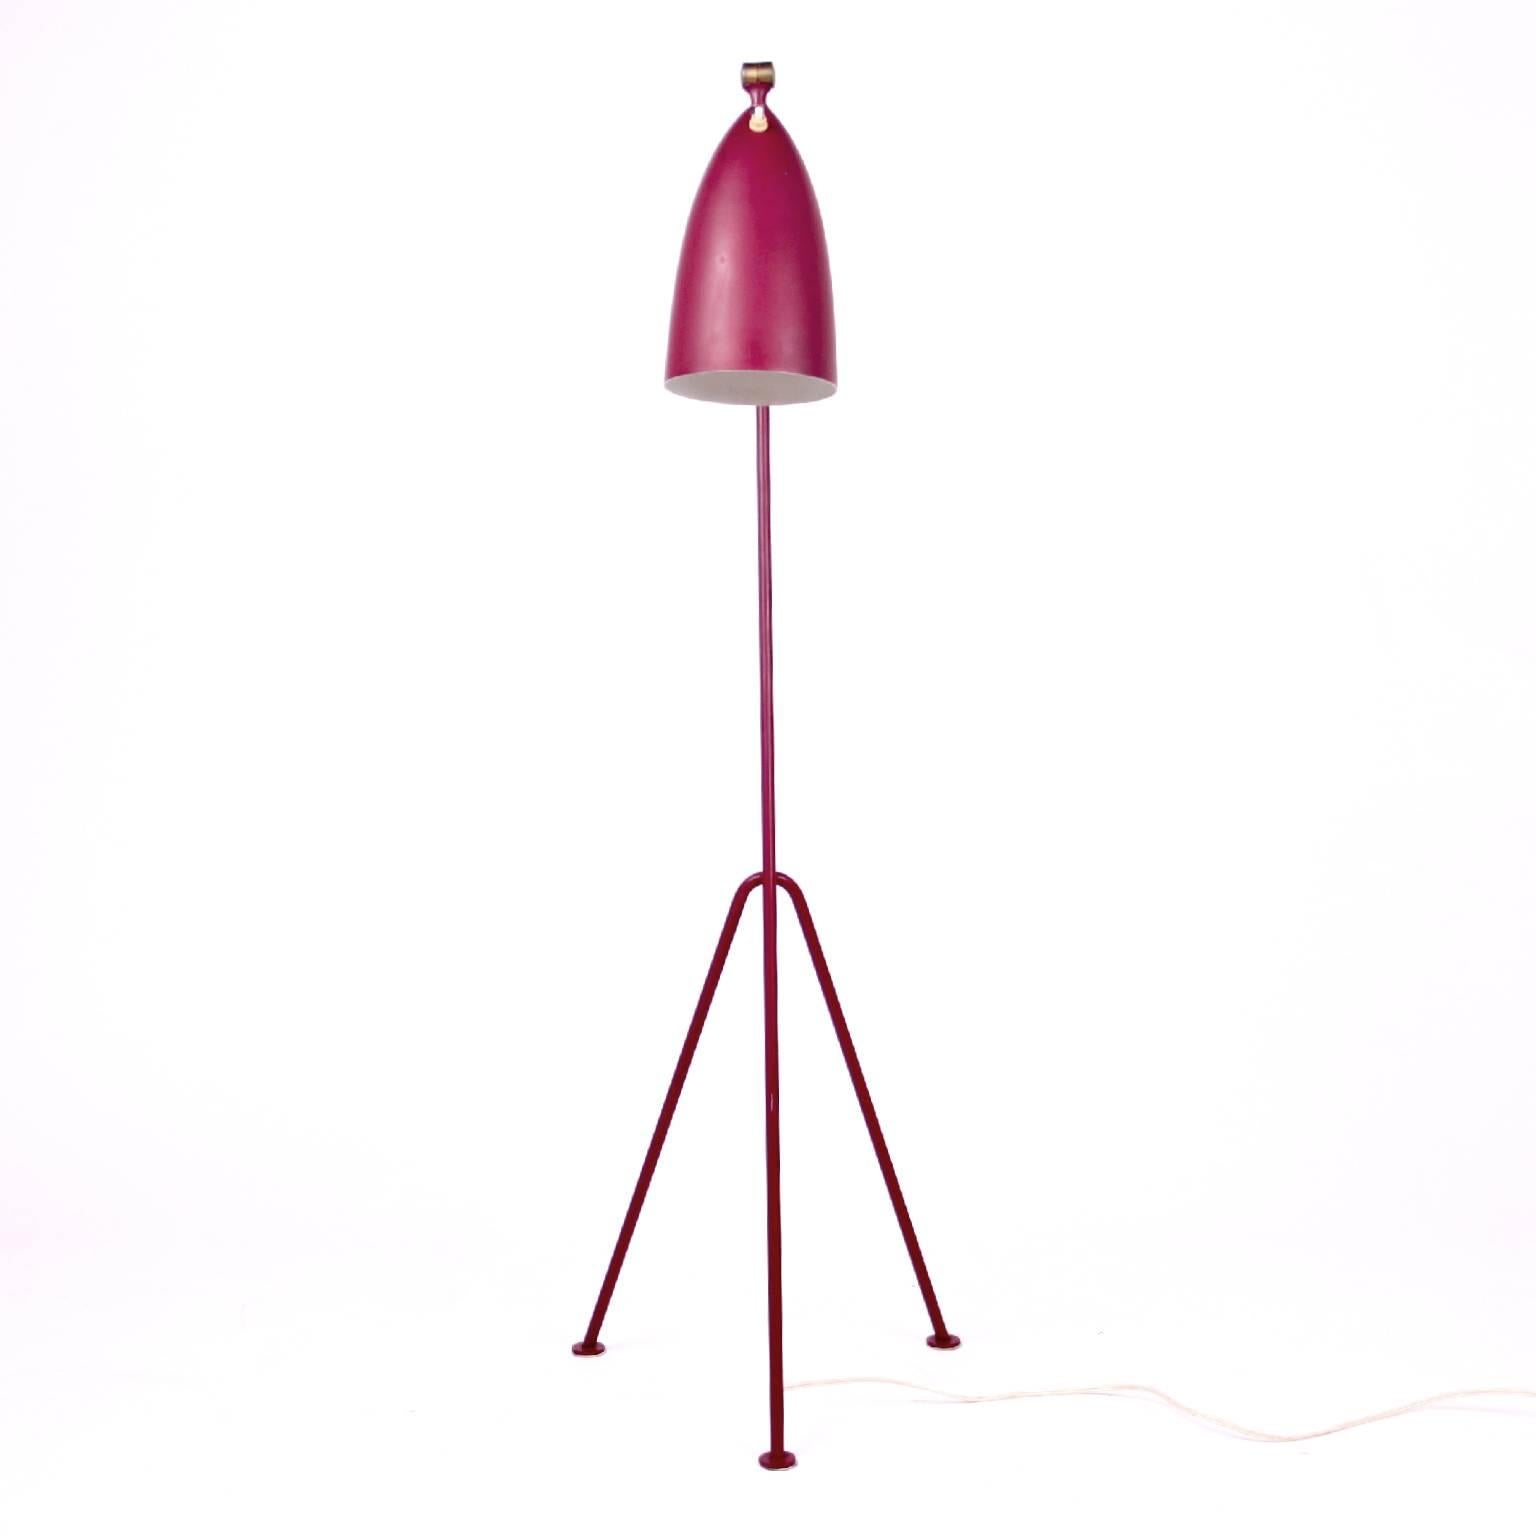 Early Greta Magnusson Grossman grasshopper lamp 

The grasshopper lamp has a tripod Stand and an adjustable elongated conical shade. 

Original red enameled steel and aluminum, brass fitting. 

Designed in 1947. 

Produced by Bergboms